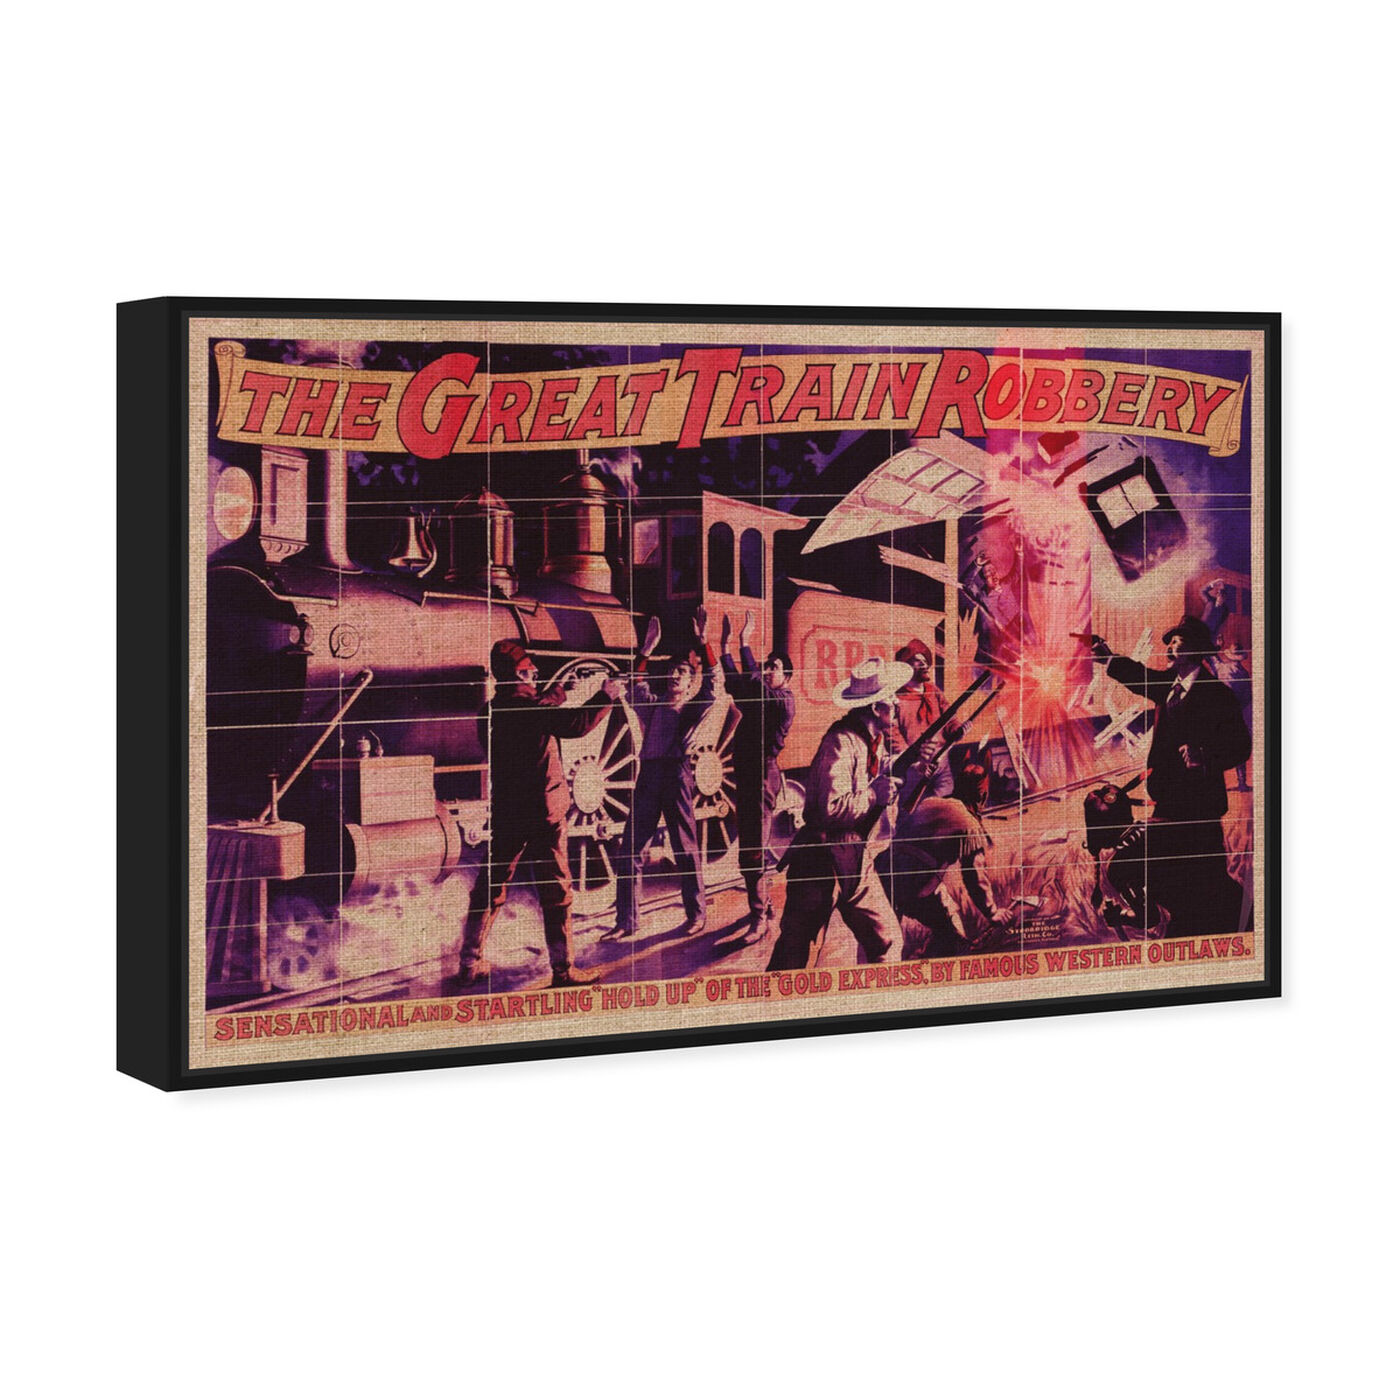 Angled view of Great Train Robbery featuring advertising and posters art.